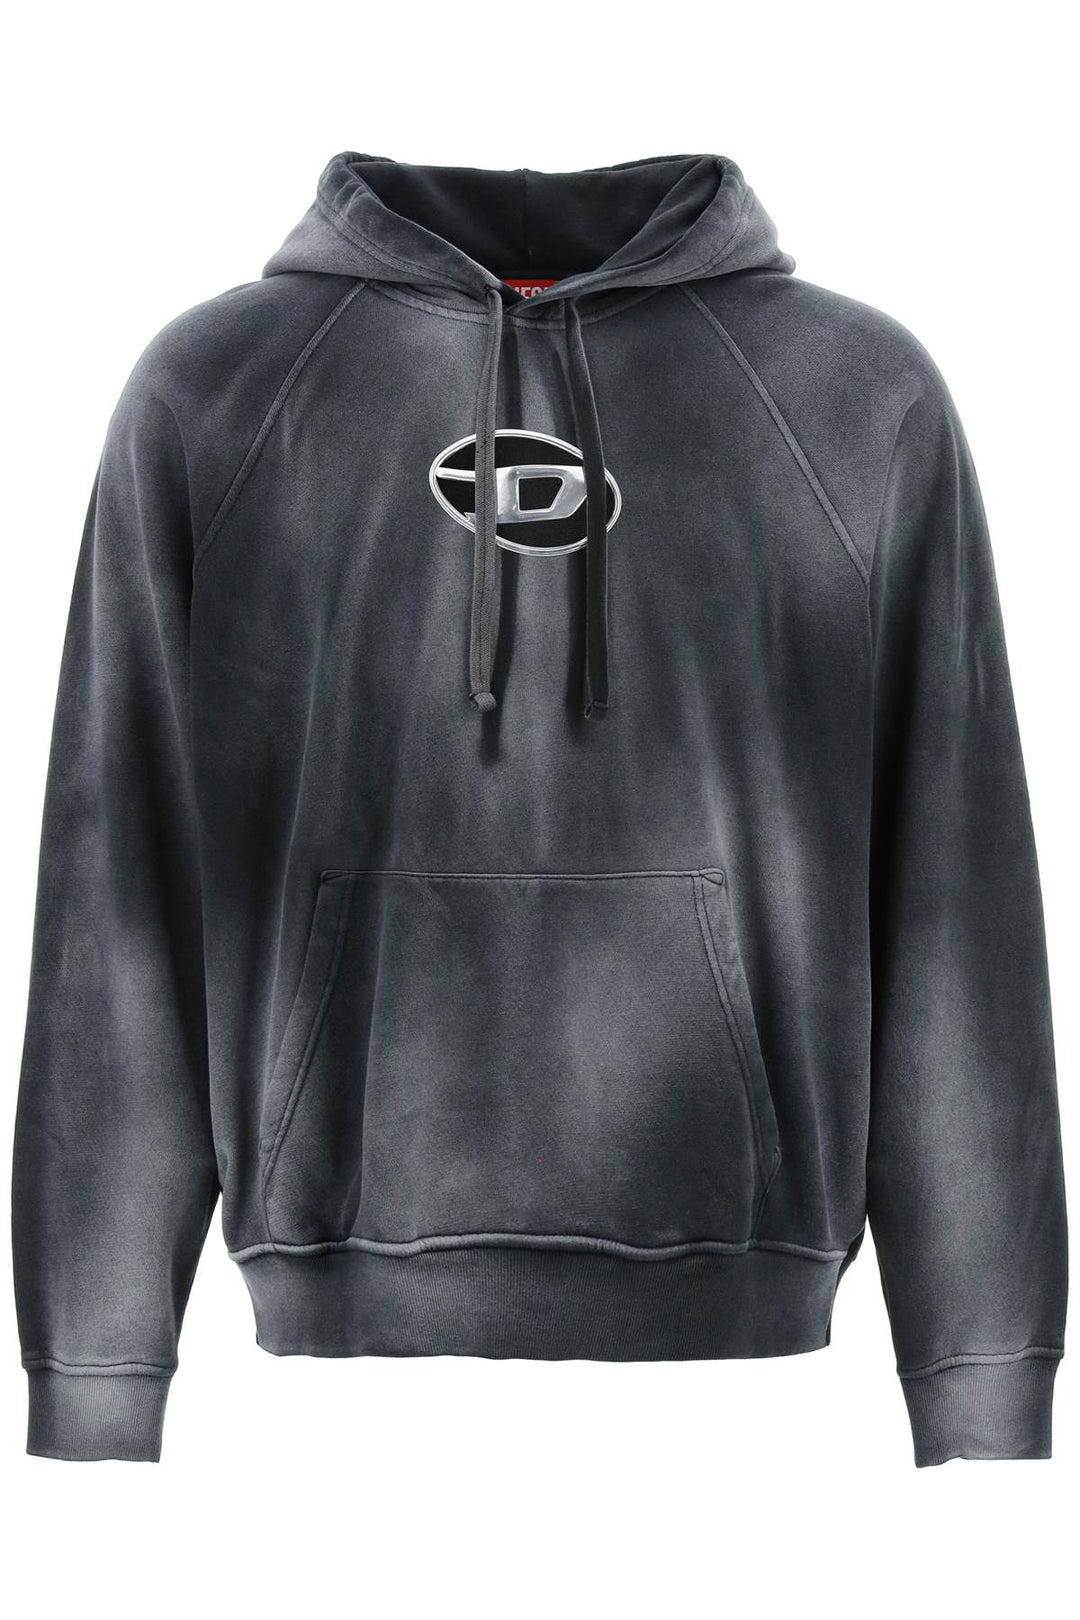 Diesel Hooded Sweatshirt With Oval Logo And D Cut   Nero